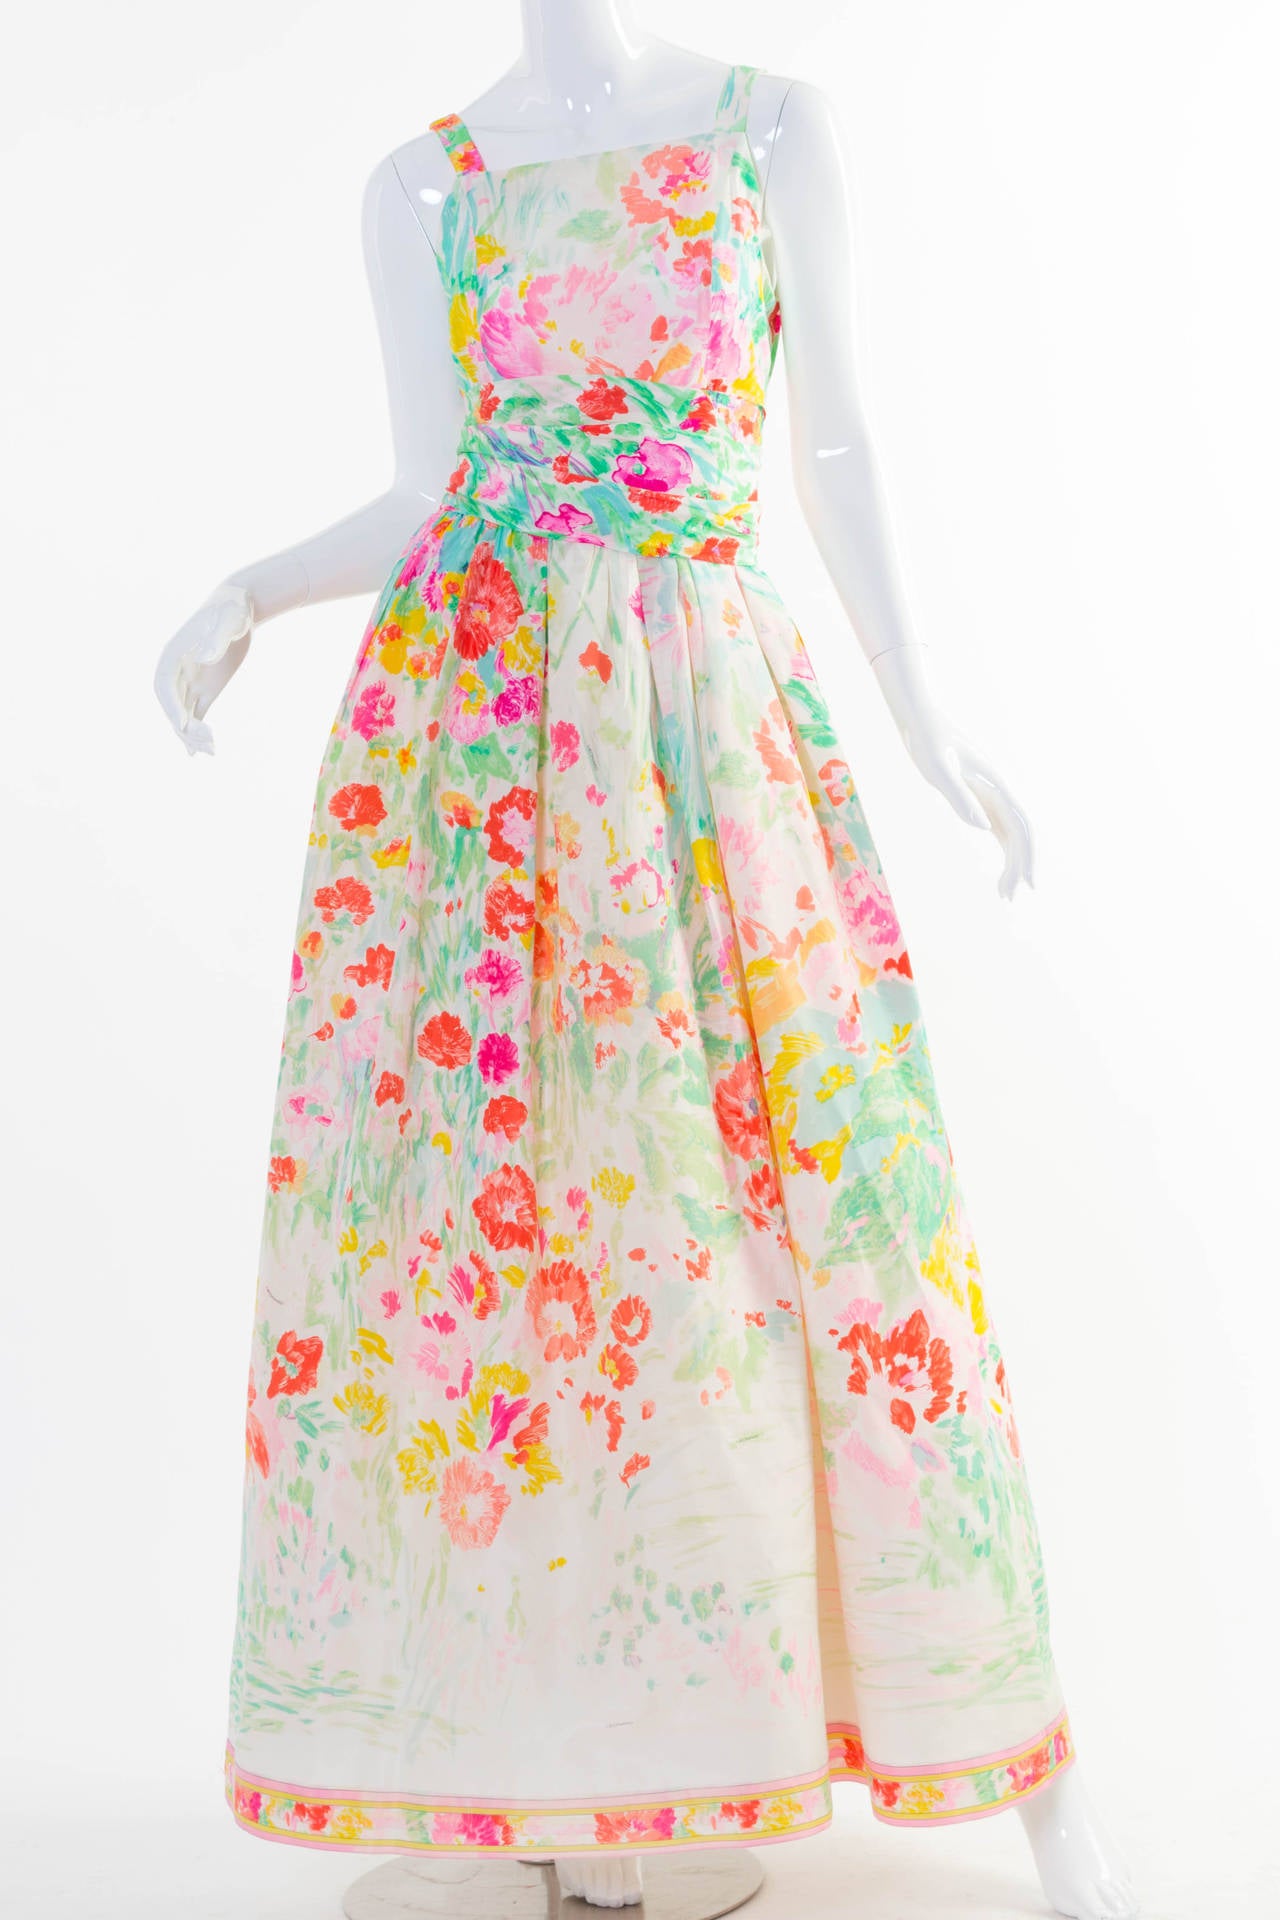 This gown arrives just in time for Spring. It’s not only the consummate garden party (or garden wedding) ensemble, but also a lovely example of why Leonard Paris has been sought out for its colorful textiles since its founding in 1958. The silk maxi